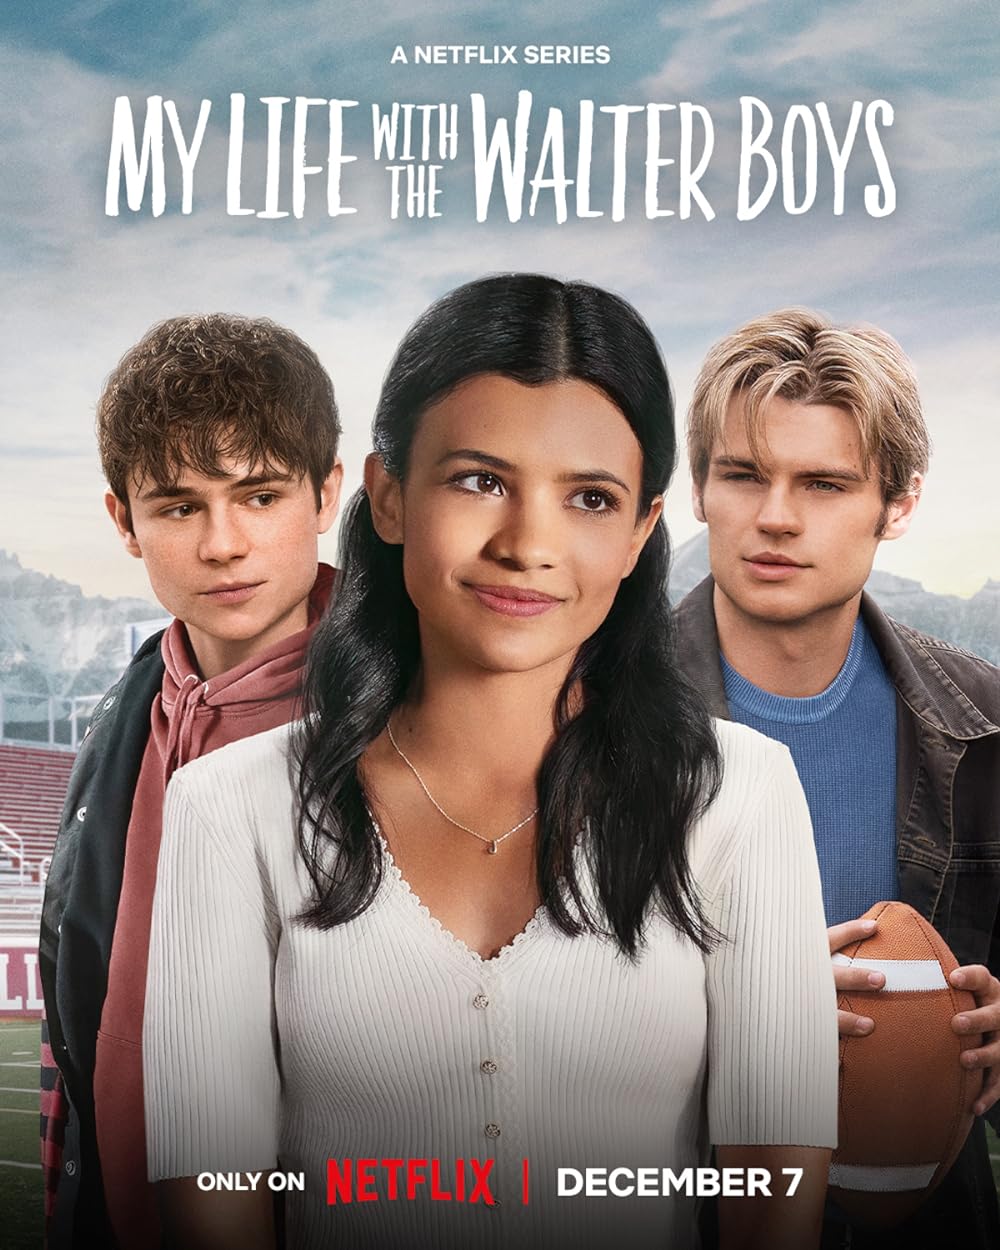 My Life with the Walter Boys (December 7) - Streaming on NetflixMy Life with the Walter Boys follows Jackie Howard's life-changing tragedy, leading her to a Colorado ranch amidst an unconventional household. Navigating evolving relationships, Jackie finds herself in a whirlwind of change, adapting to new dynamics.